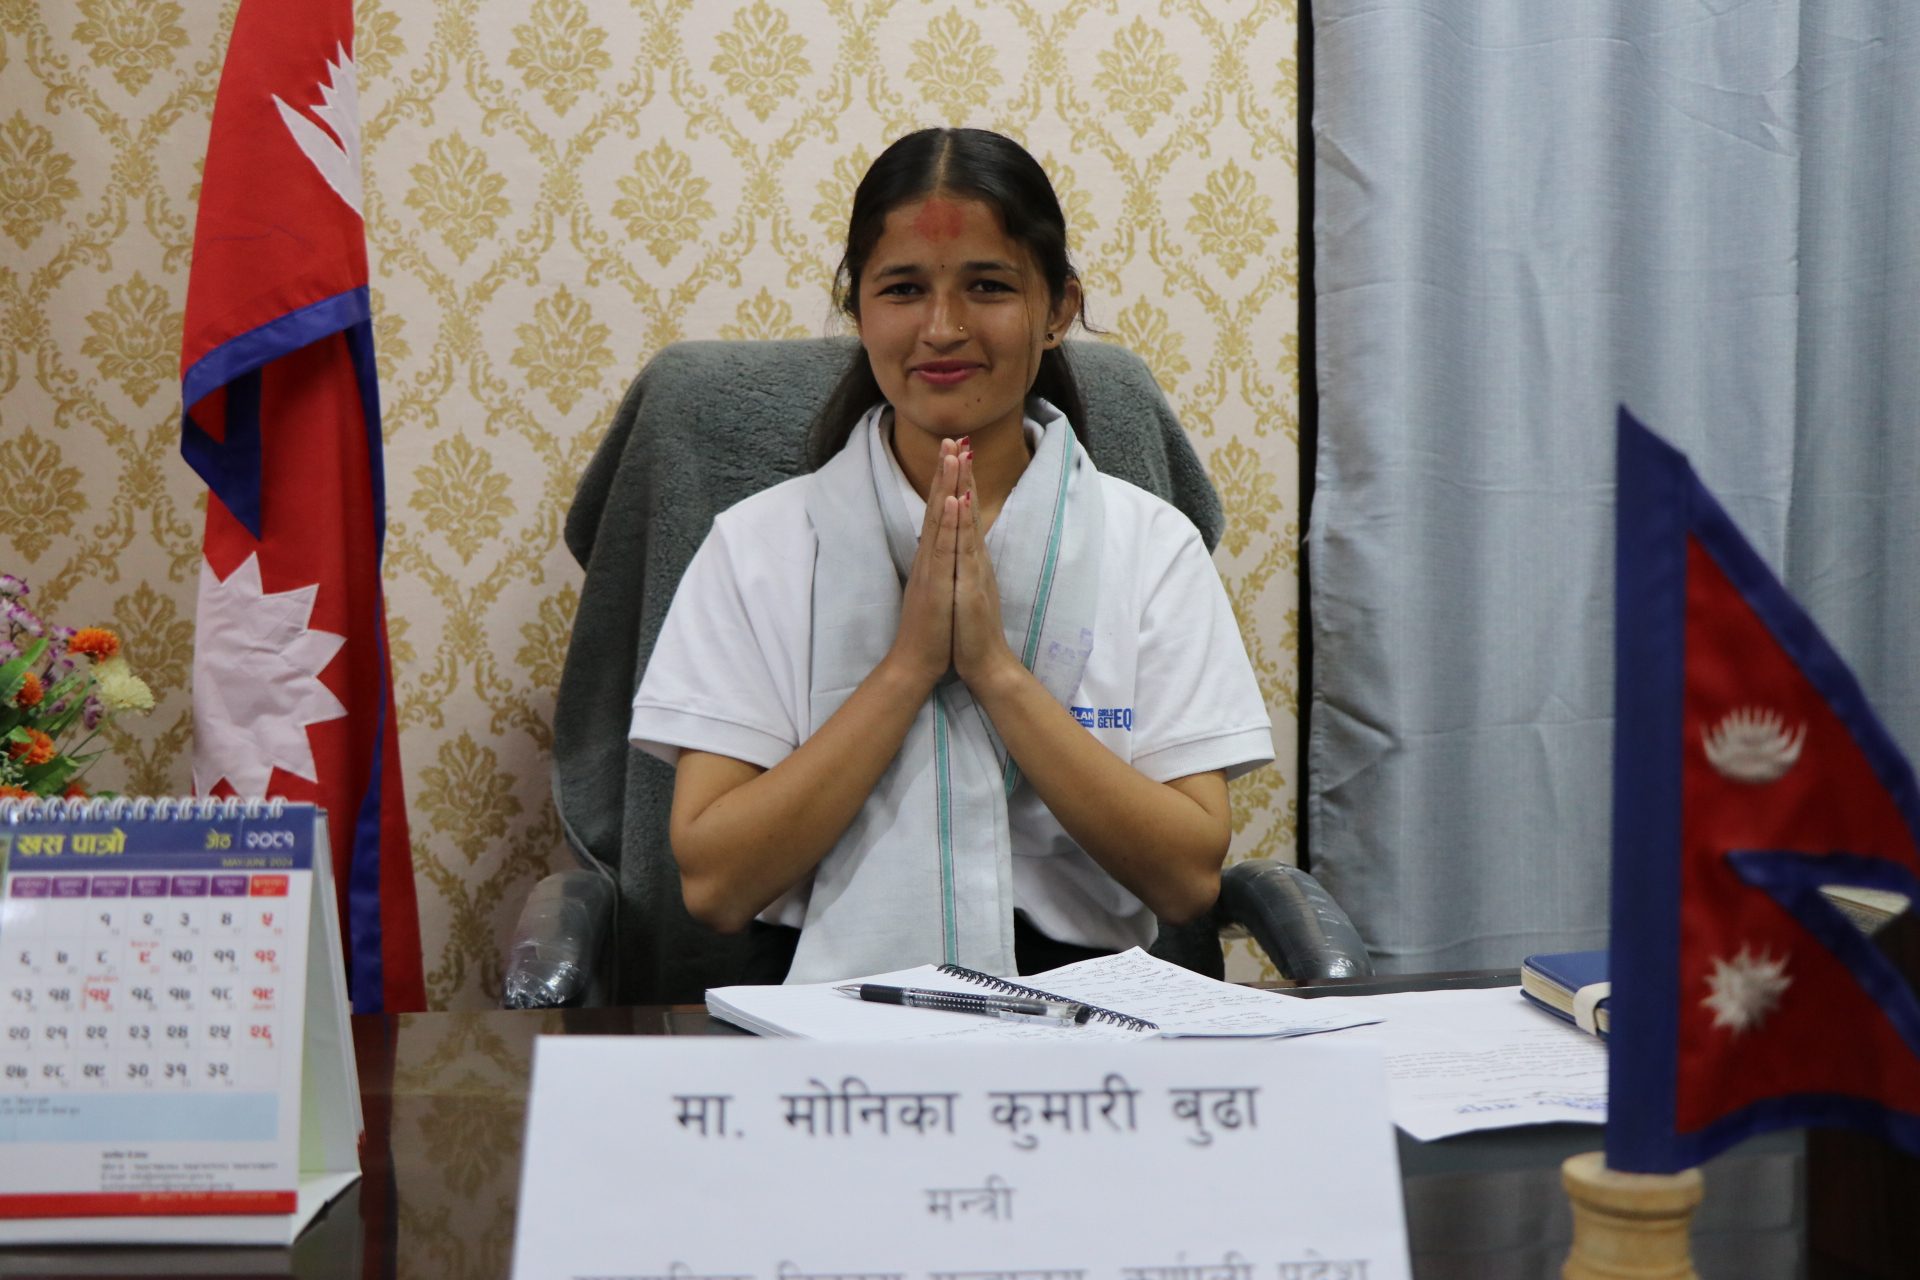 Monika joining her hands and greeting after taking over the position of the Social Development Minister of Karnali Province.